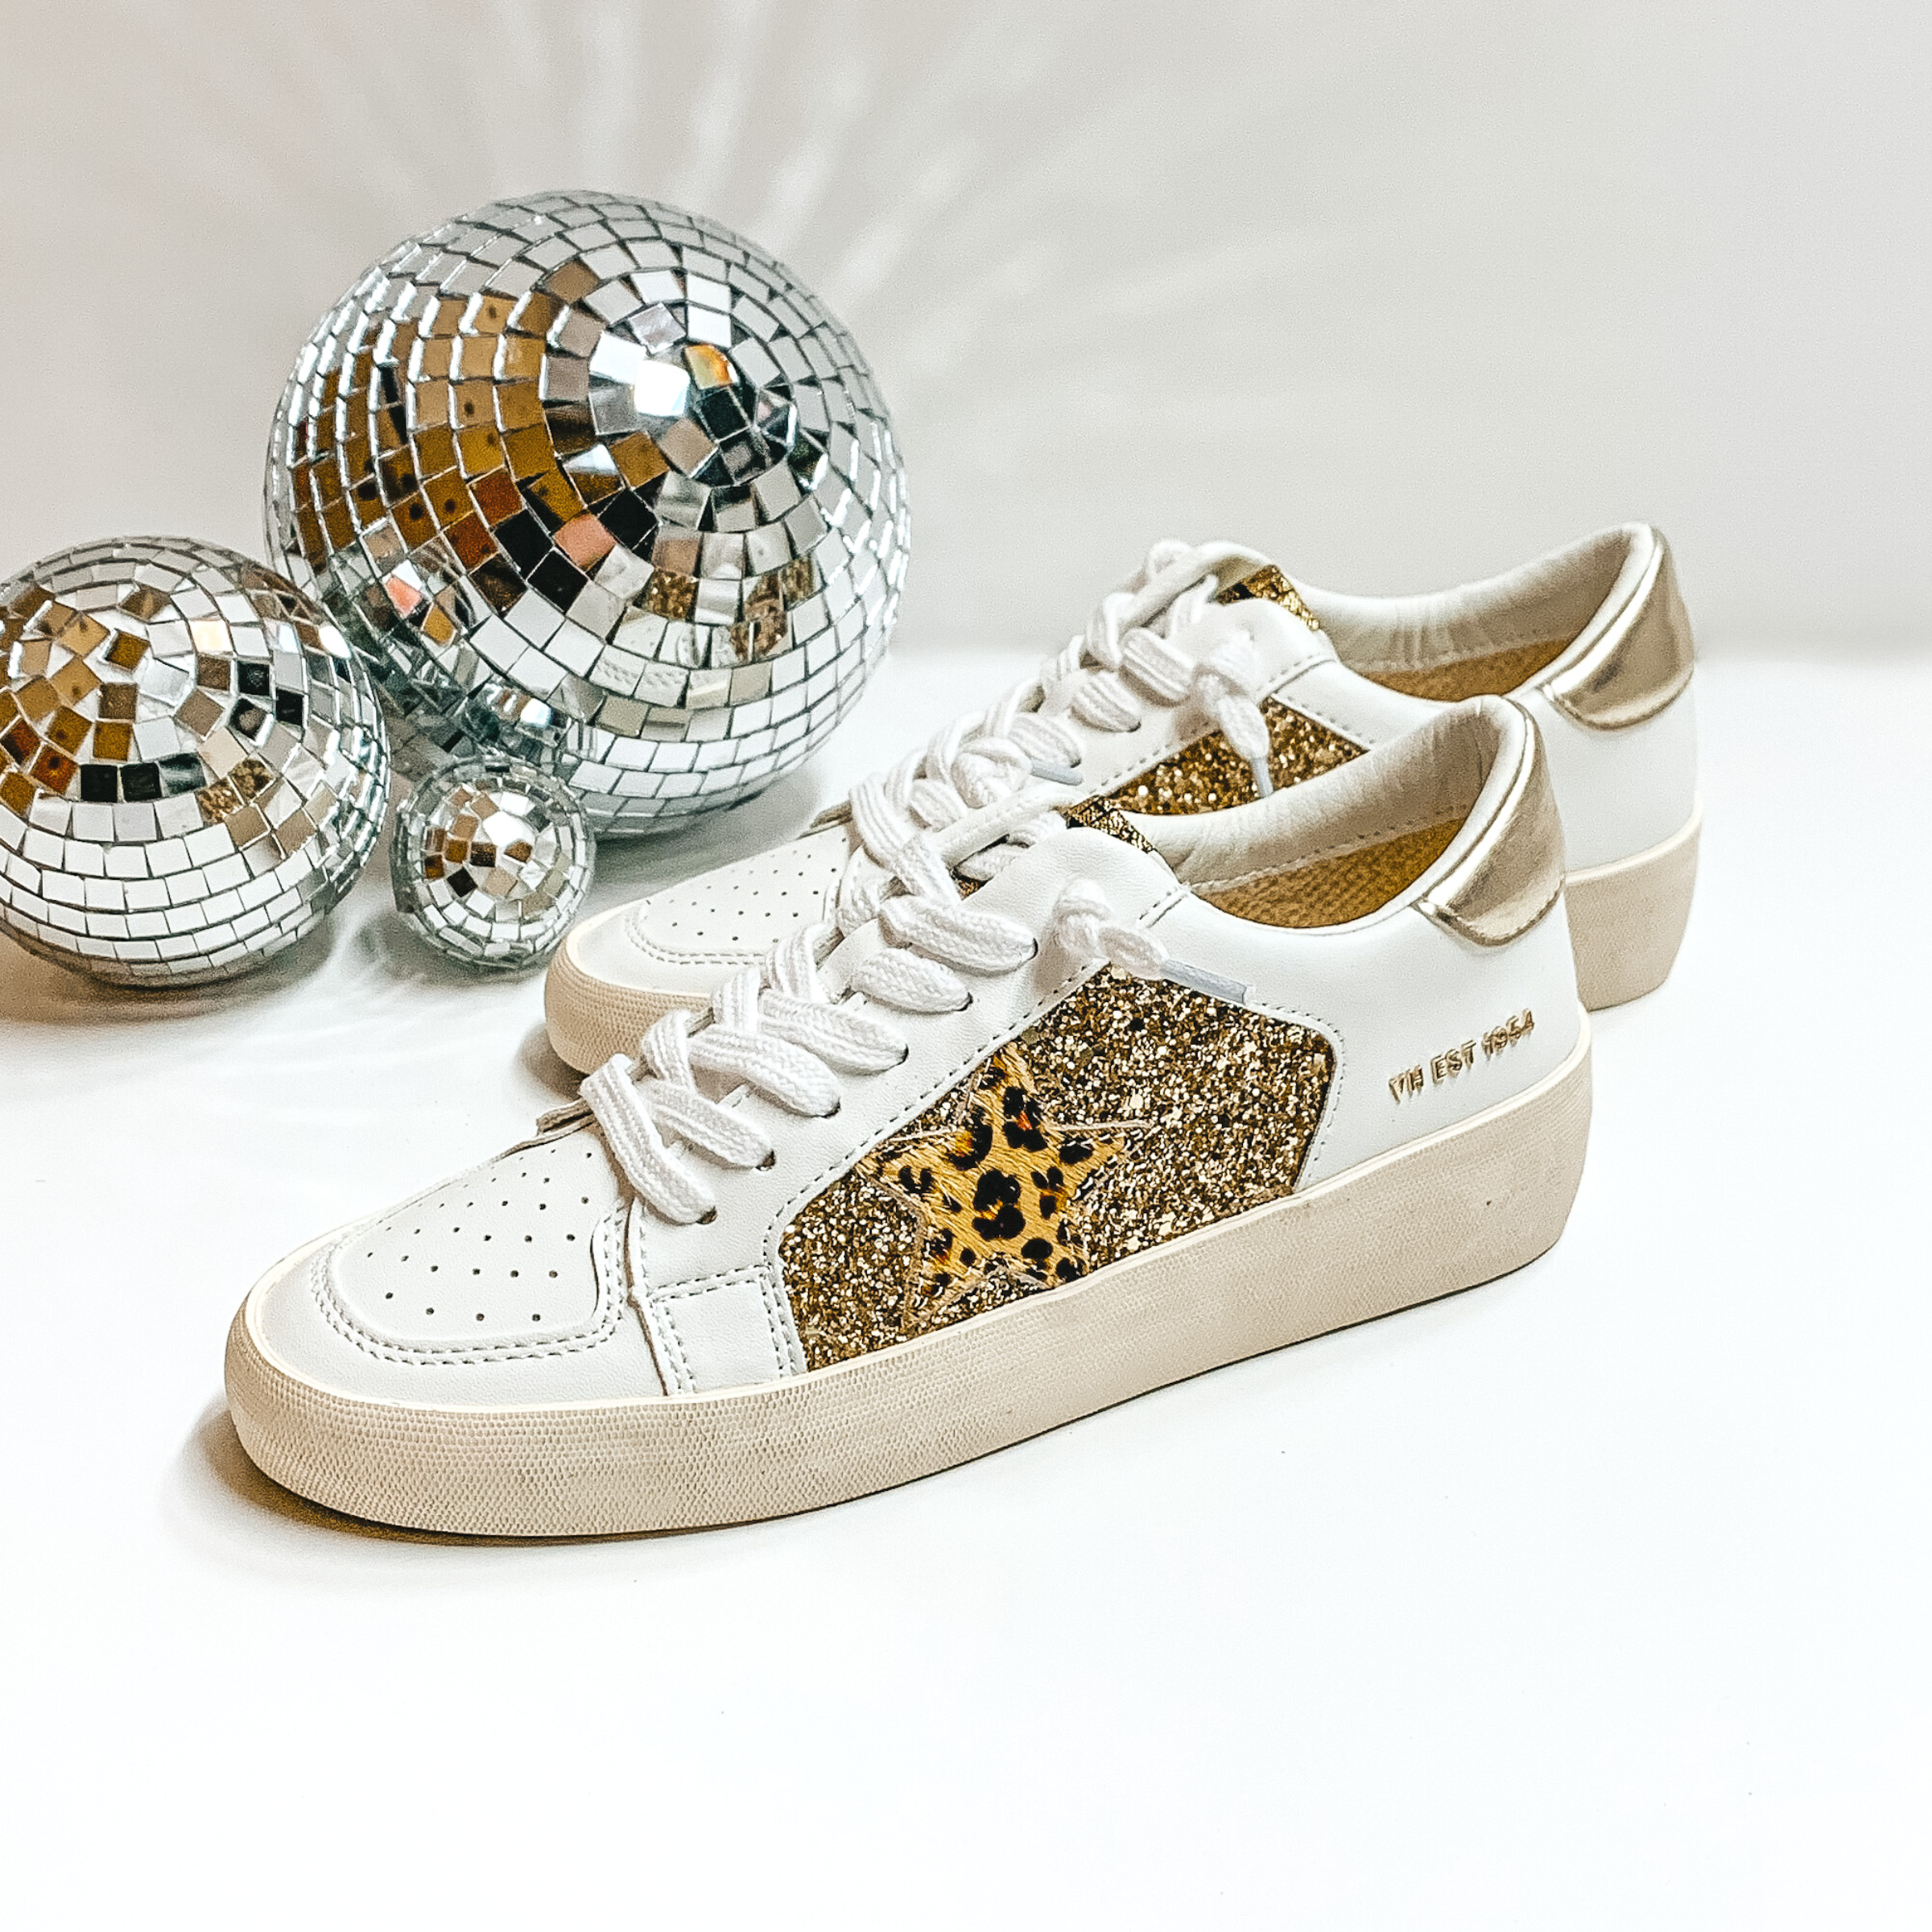 White tennis shoes with a patch of white gold glitter and a leopard print star emblem. These shoes also have white laces and a gold part on the heel. These shoes are pictured on a white background with disco balls on the left hand side.